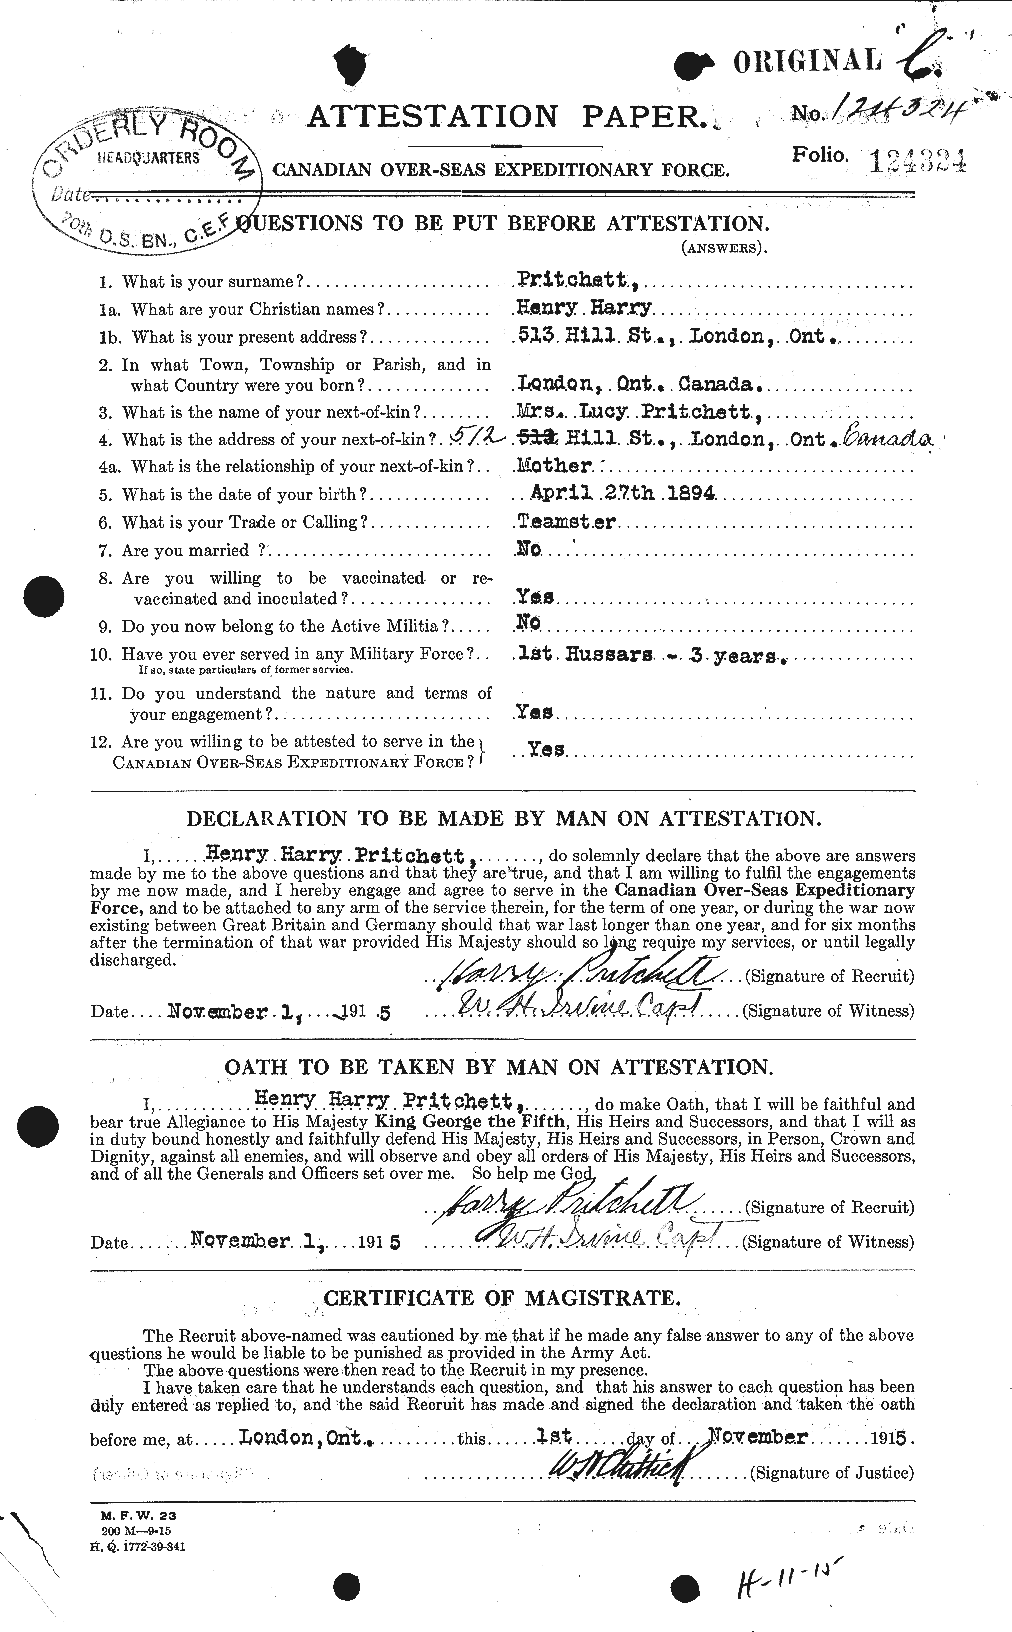 Personnel Records of the First World War - CEF 588639a